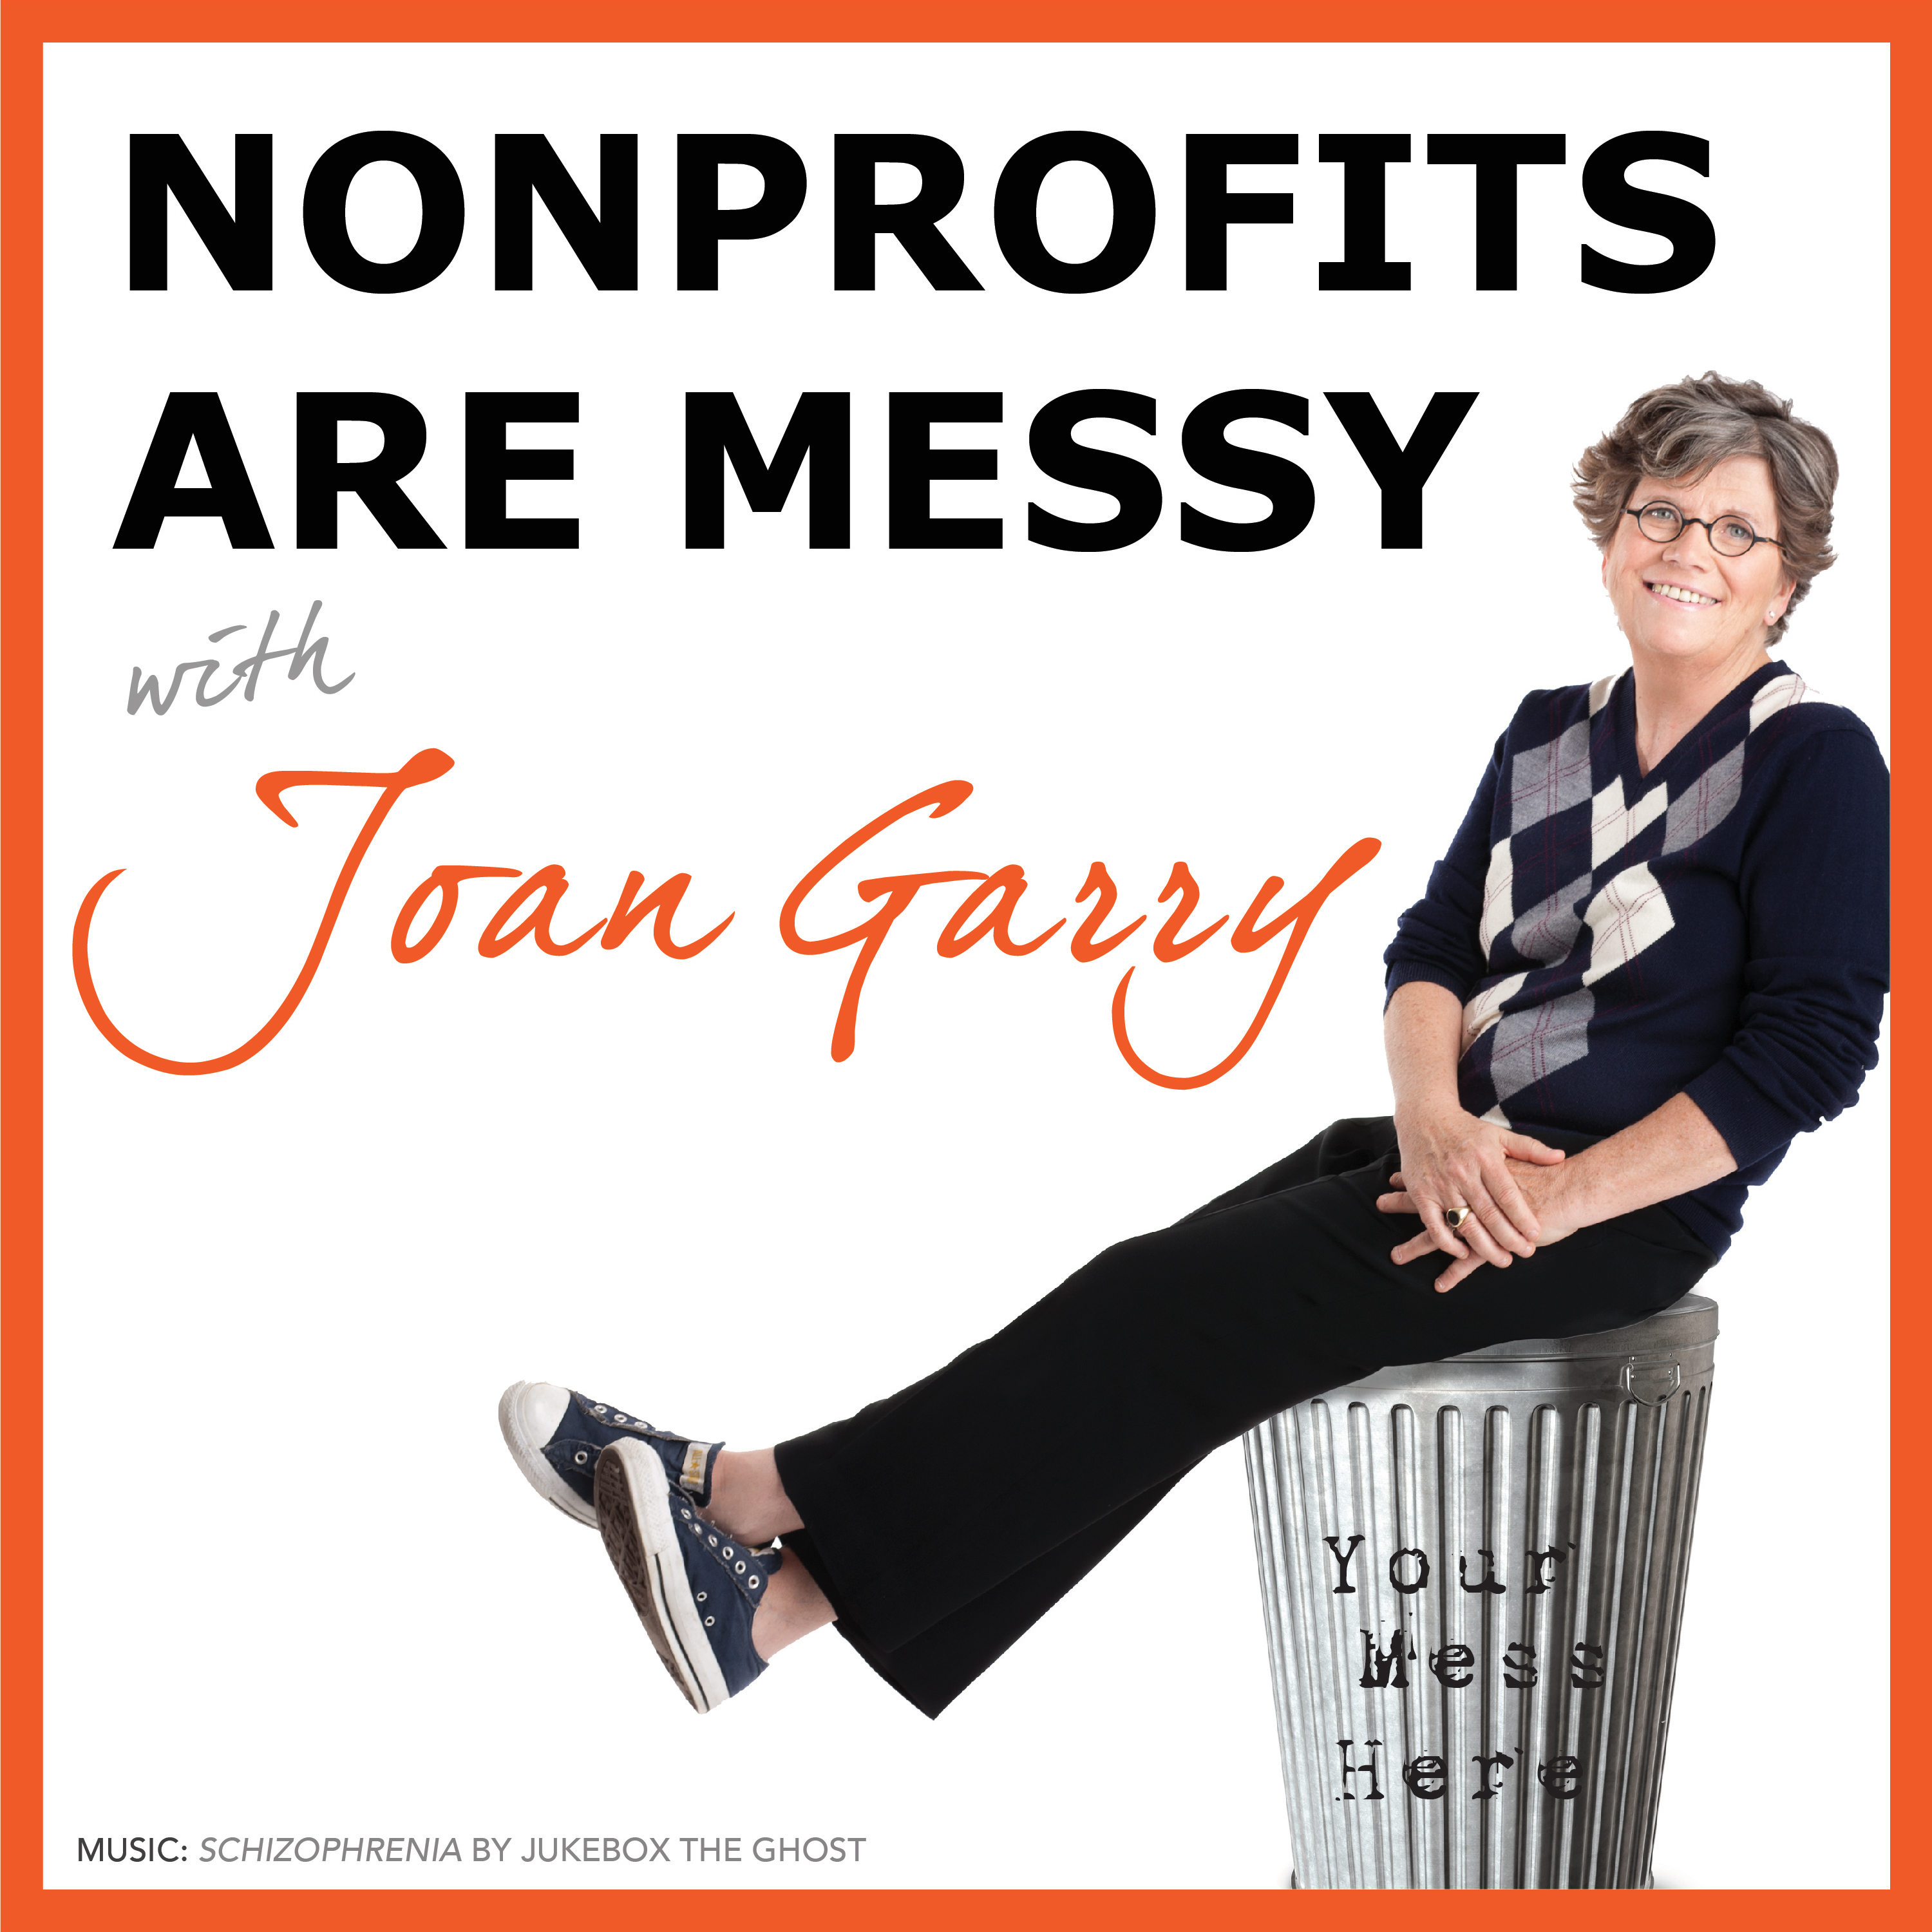 A highlight from Ep 141: Why So Many Nonprofit Fundraisers Struggle With Donor Stewardship (with Lisa Greer)